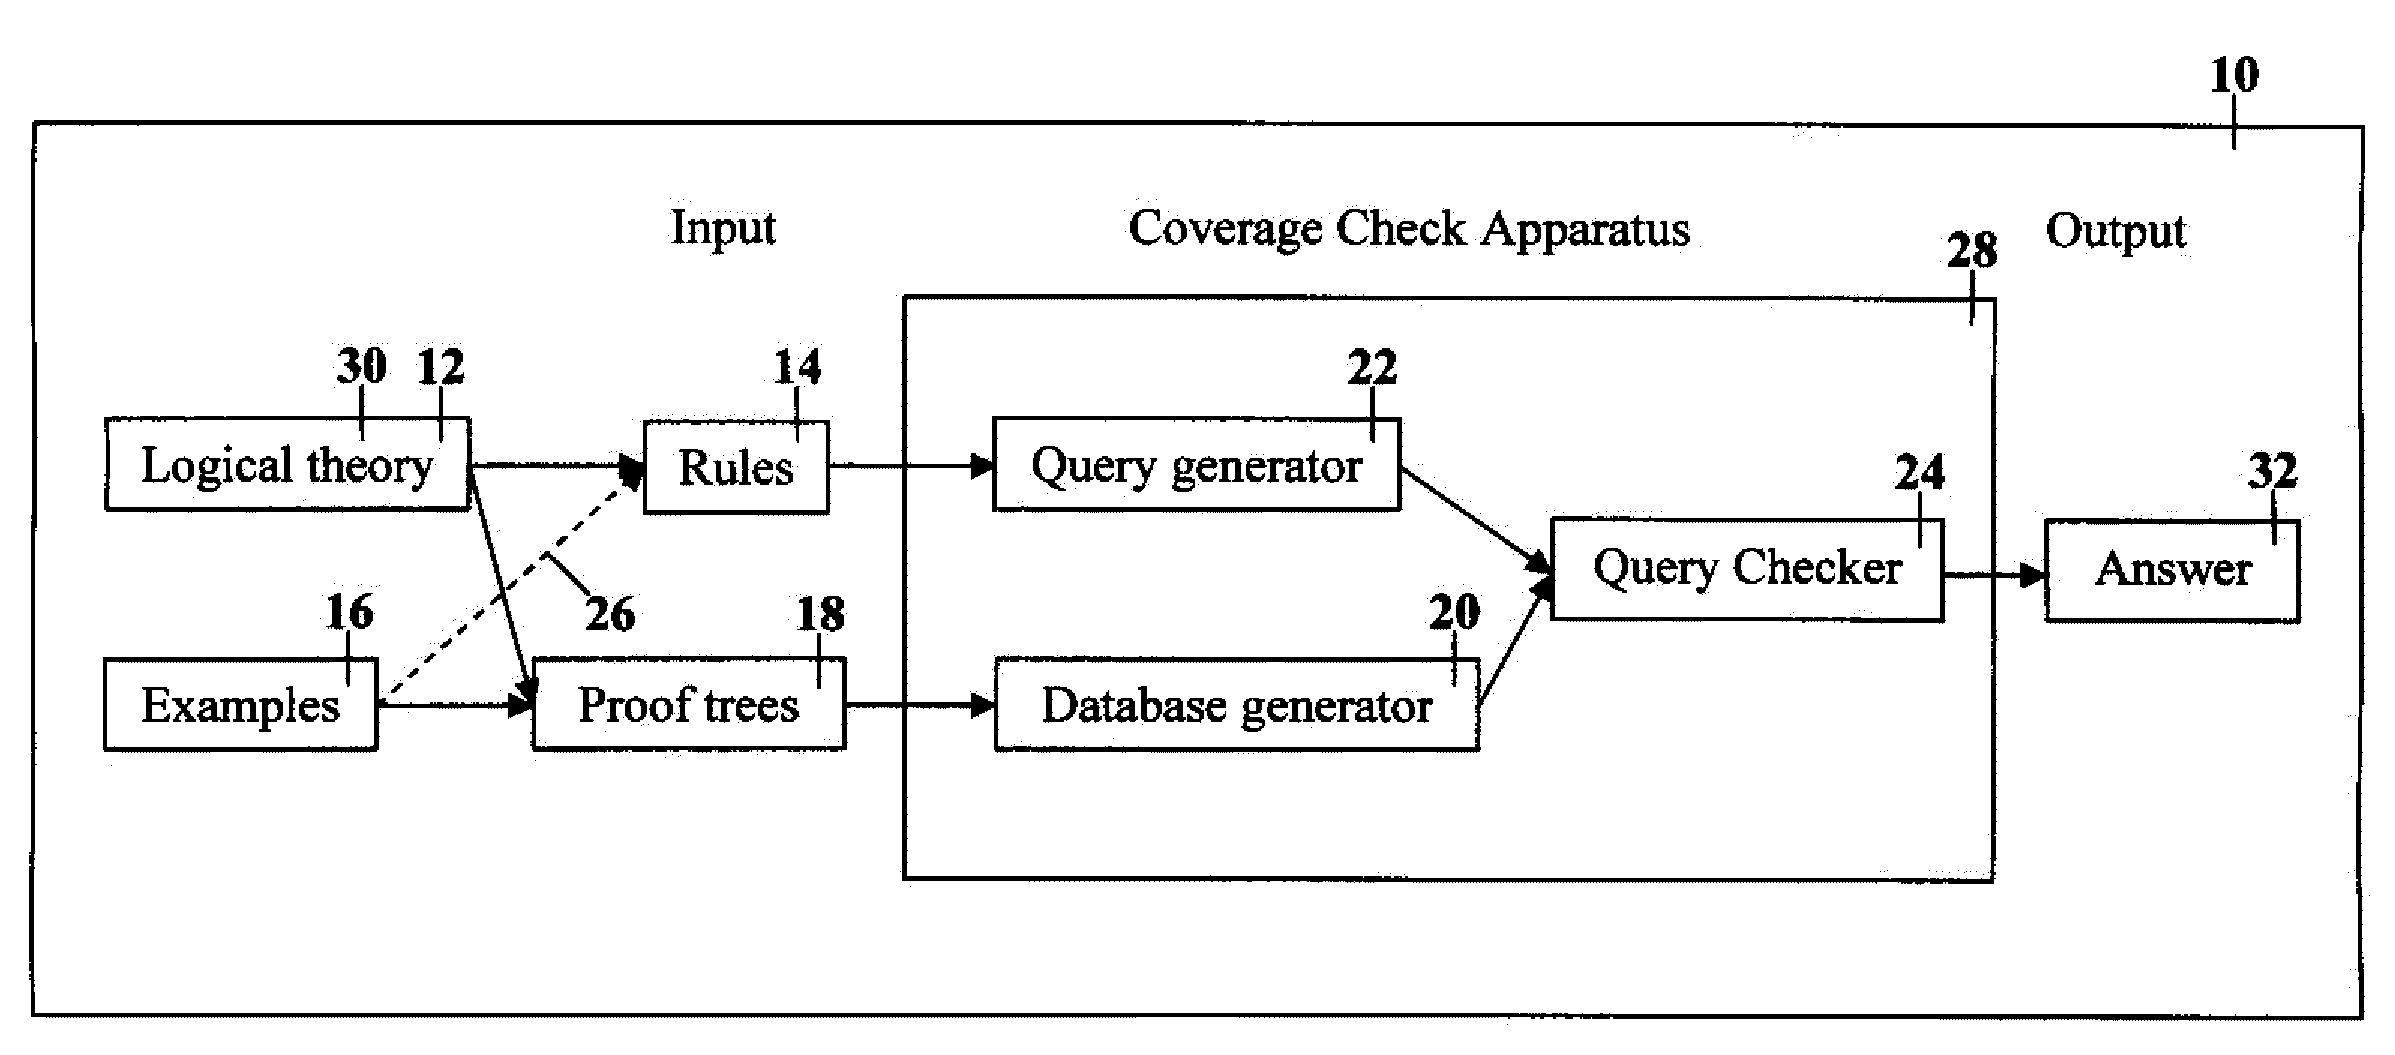 Method for efficiently checking coverage of rules derived from a logical theory